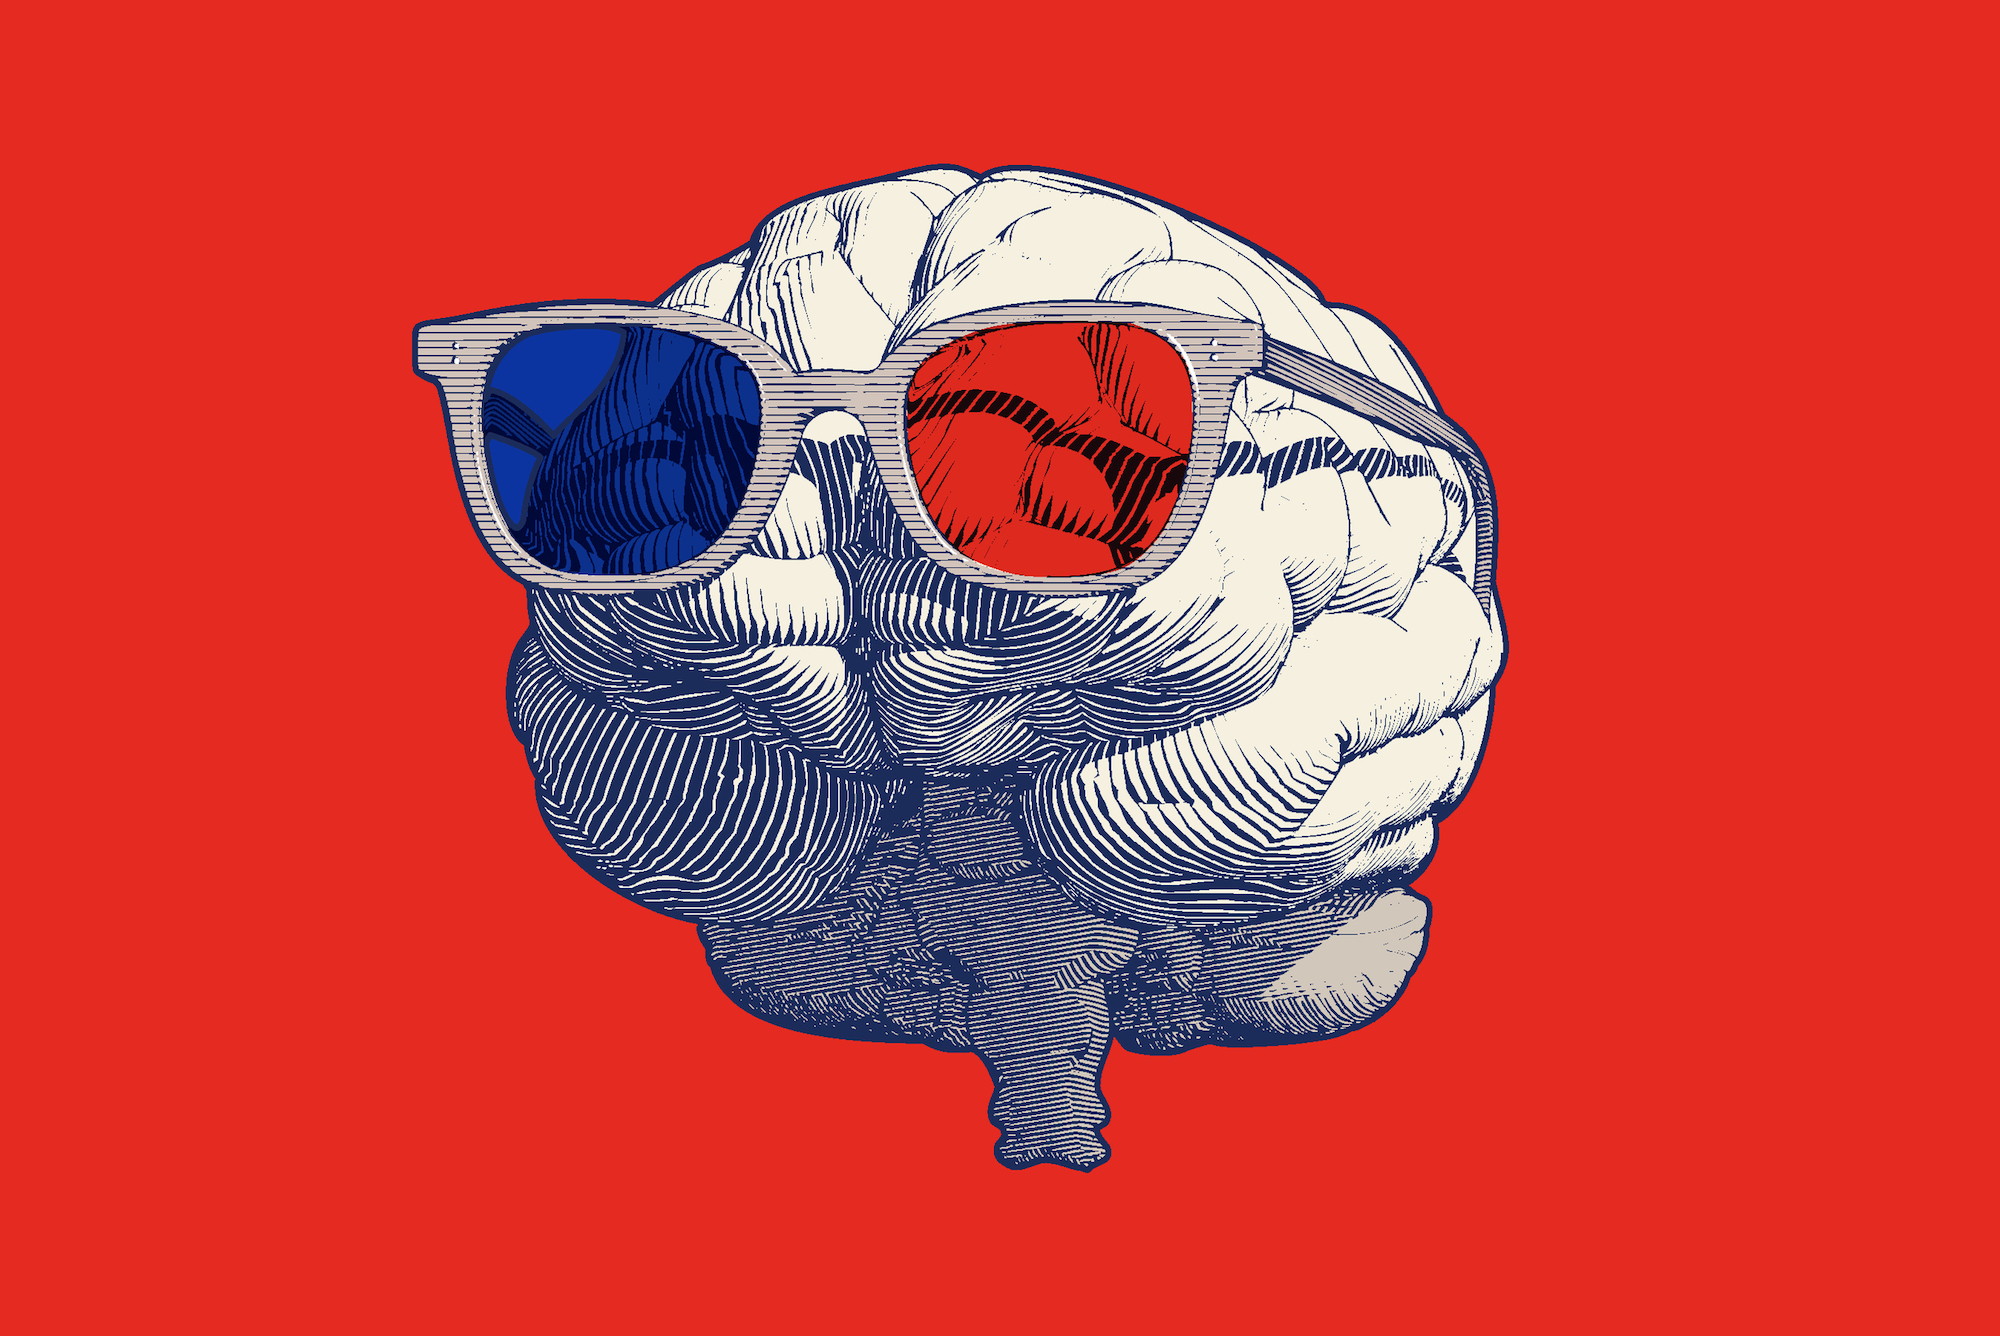 An illustration of a white human brain wearing 3d glasses, with one blue lens and one red lens, against a red background.